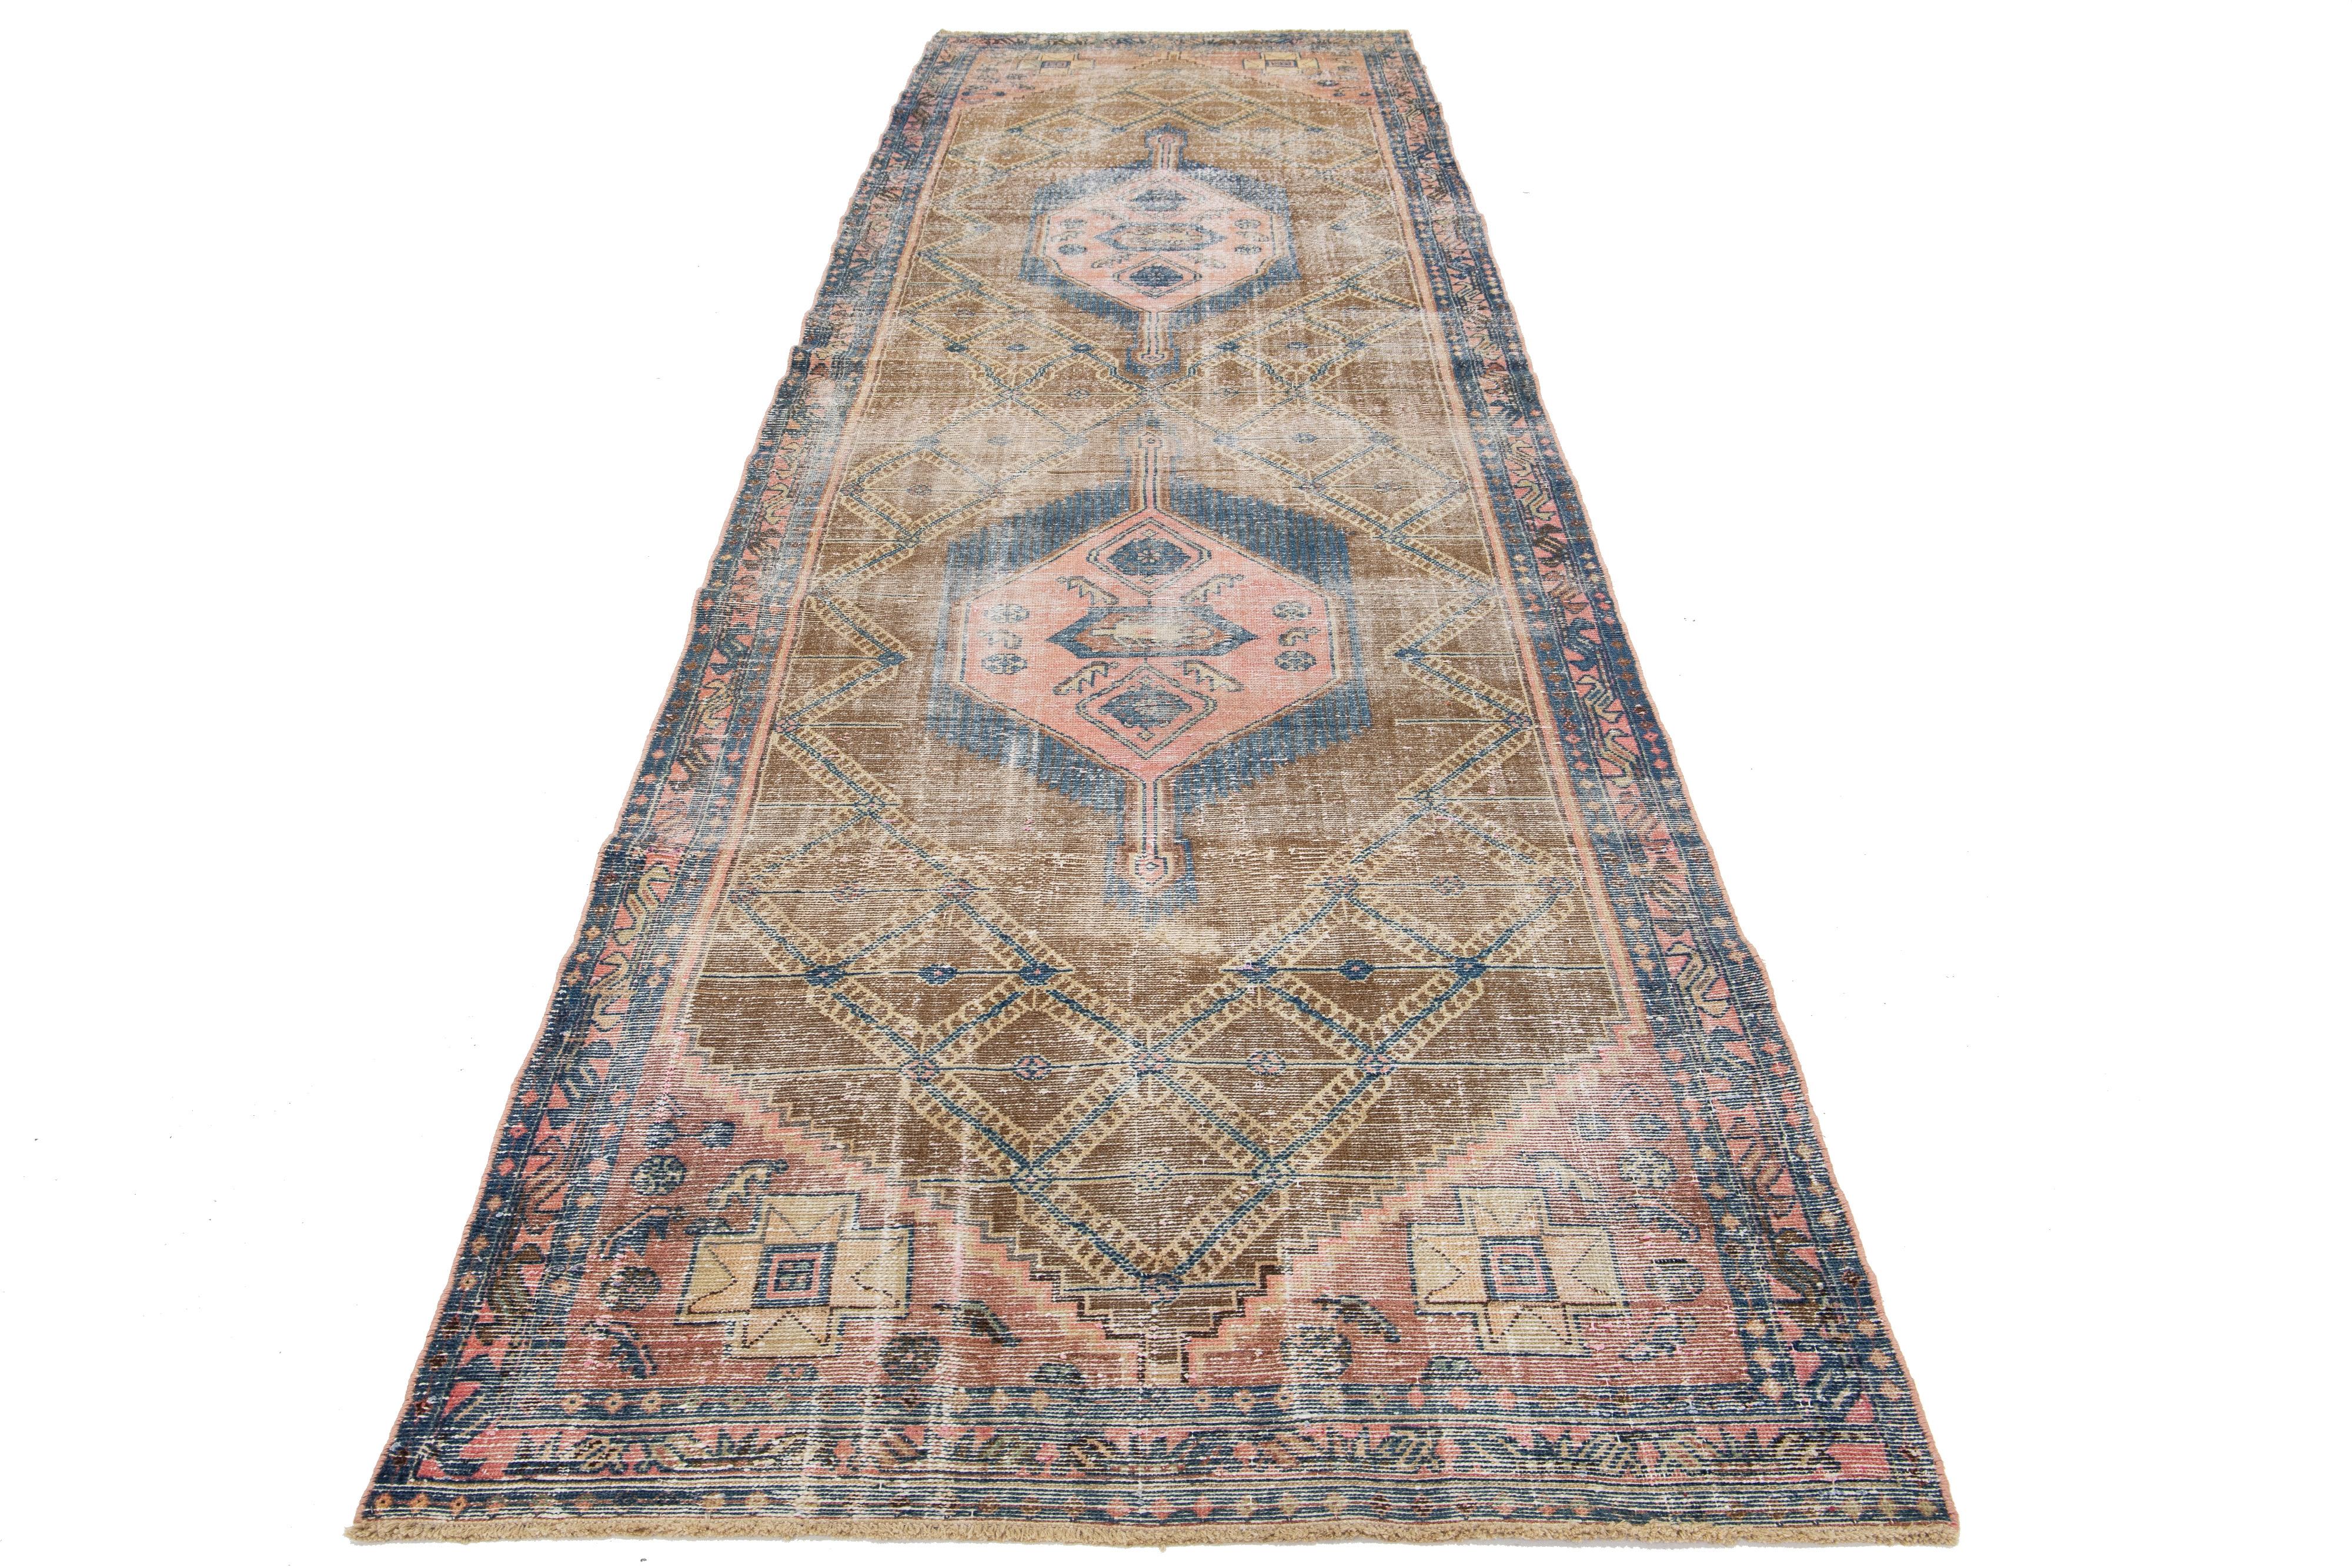 This vintage wool runner features a brown field with peach and blue tribal accents of Persian origin.

This rug measures 4'2